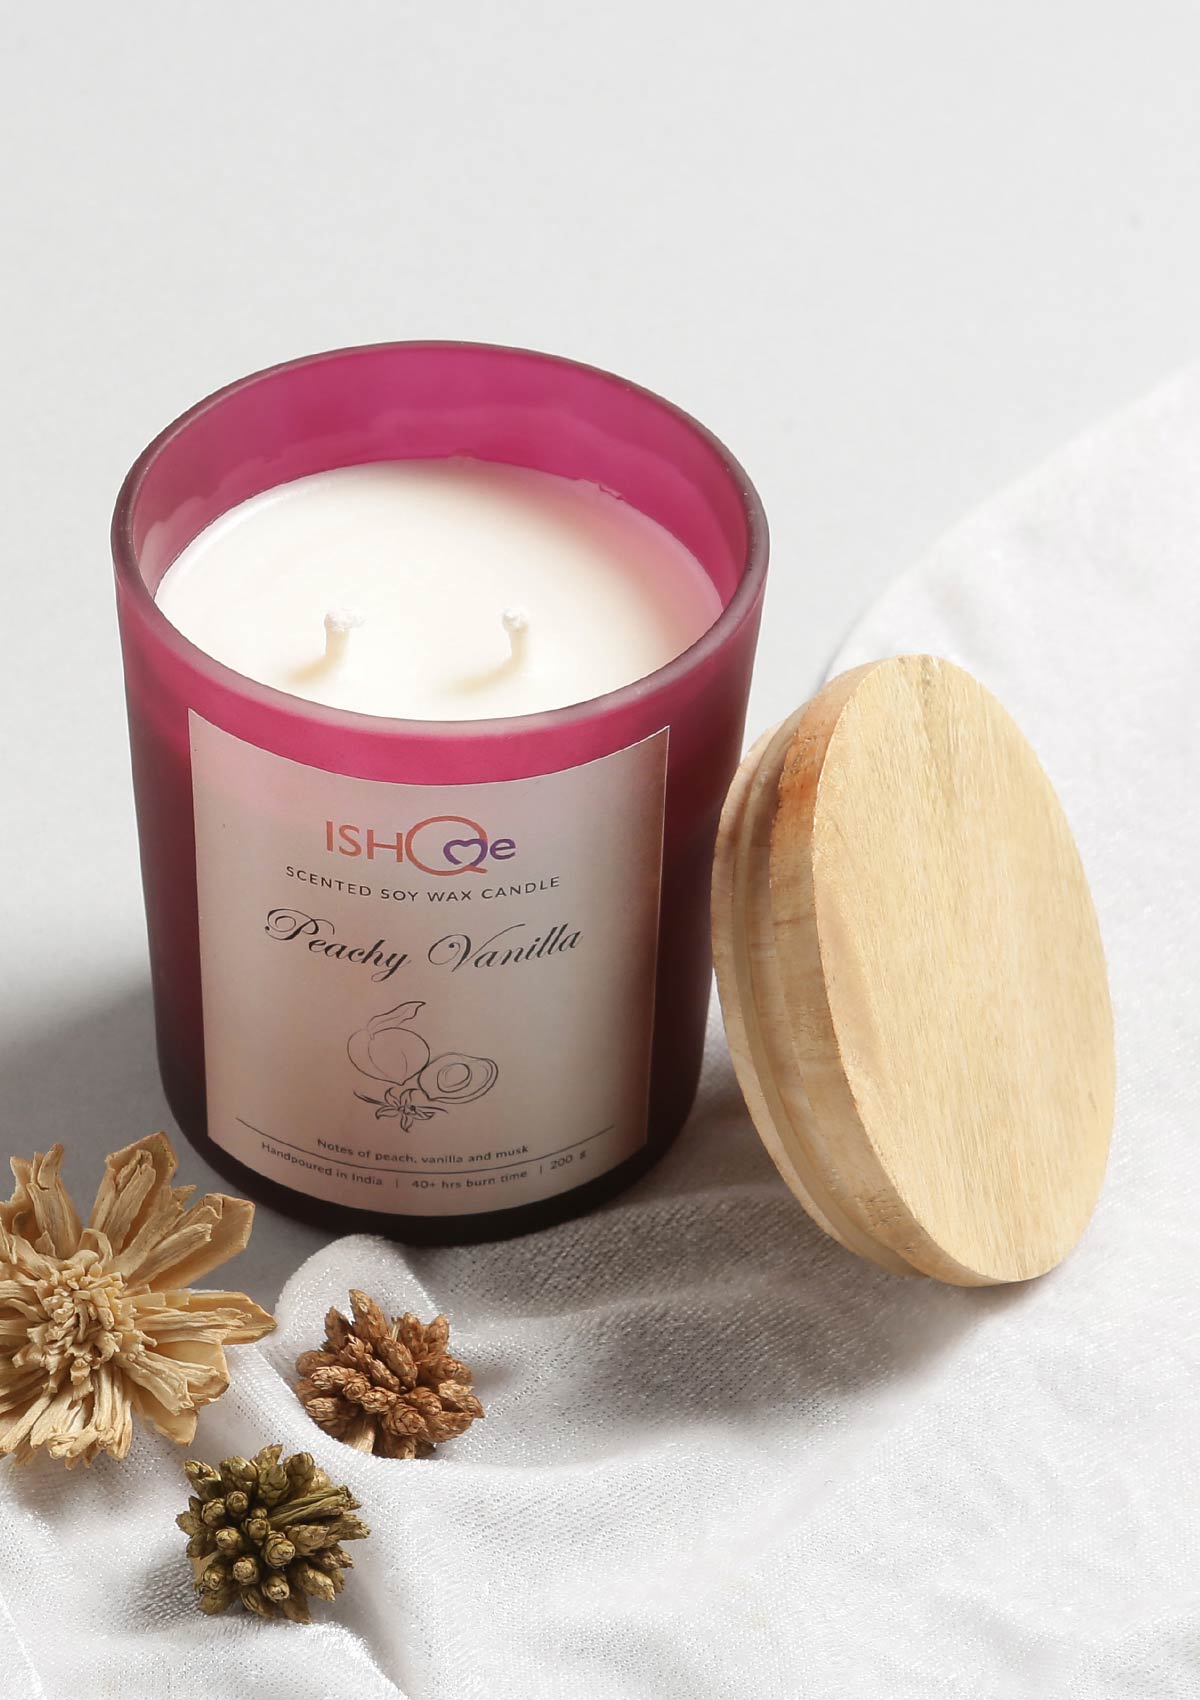 Scented Soy Wax Candle - Peachy Vanilla - IshqMe